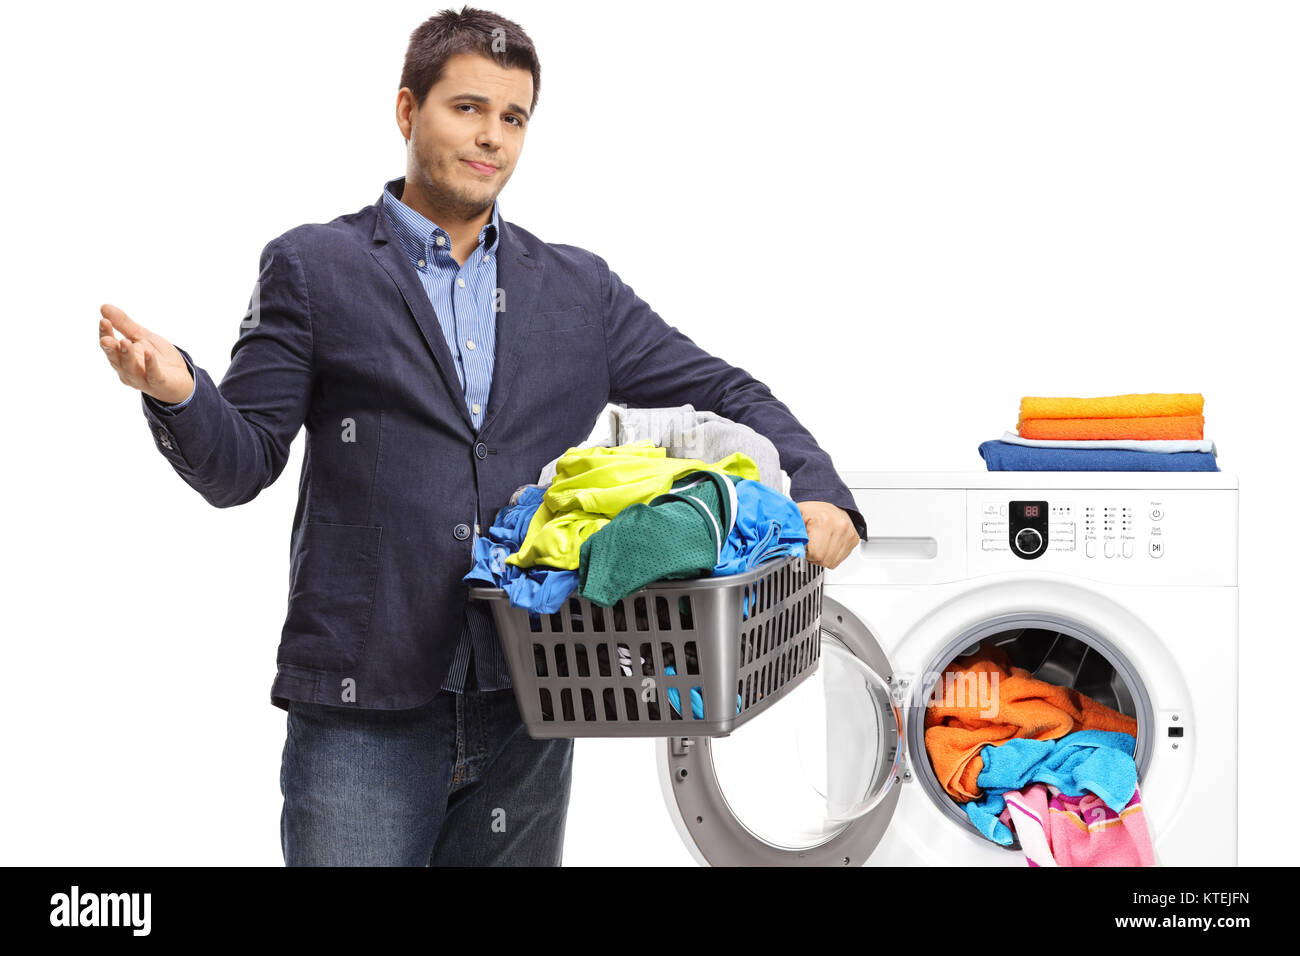 Unhappy elegant guy holding a laundry basket filled with clothes in front of a washing machine isolated on white background Stock Photo